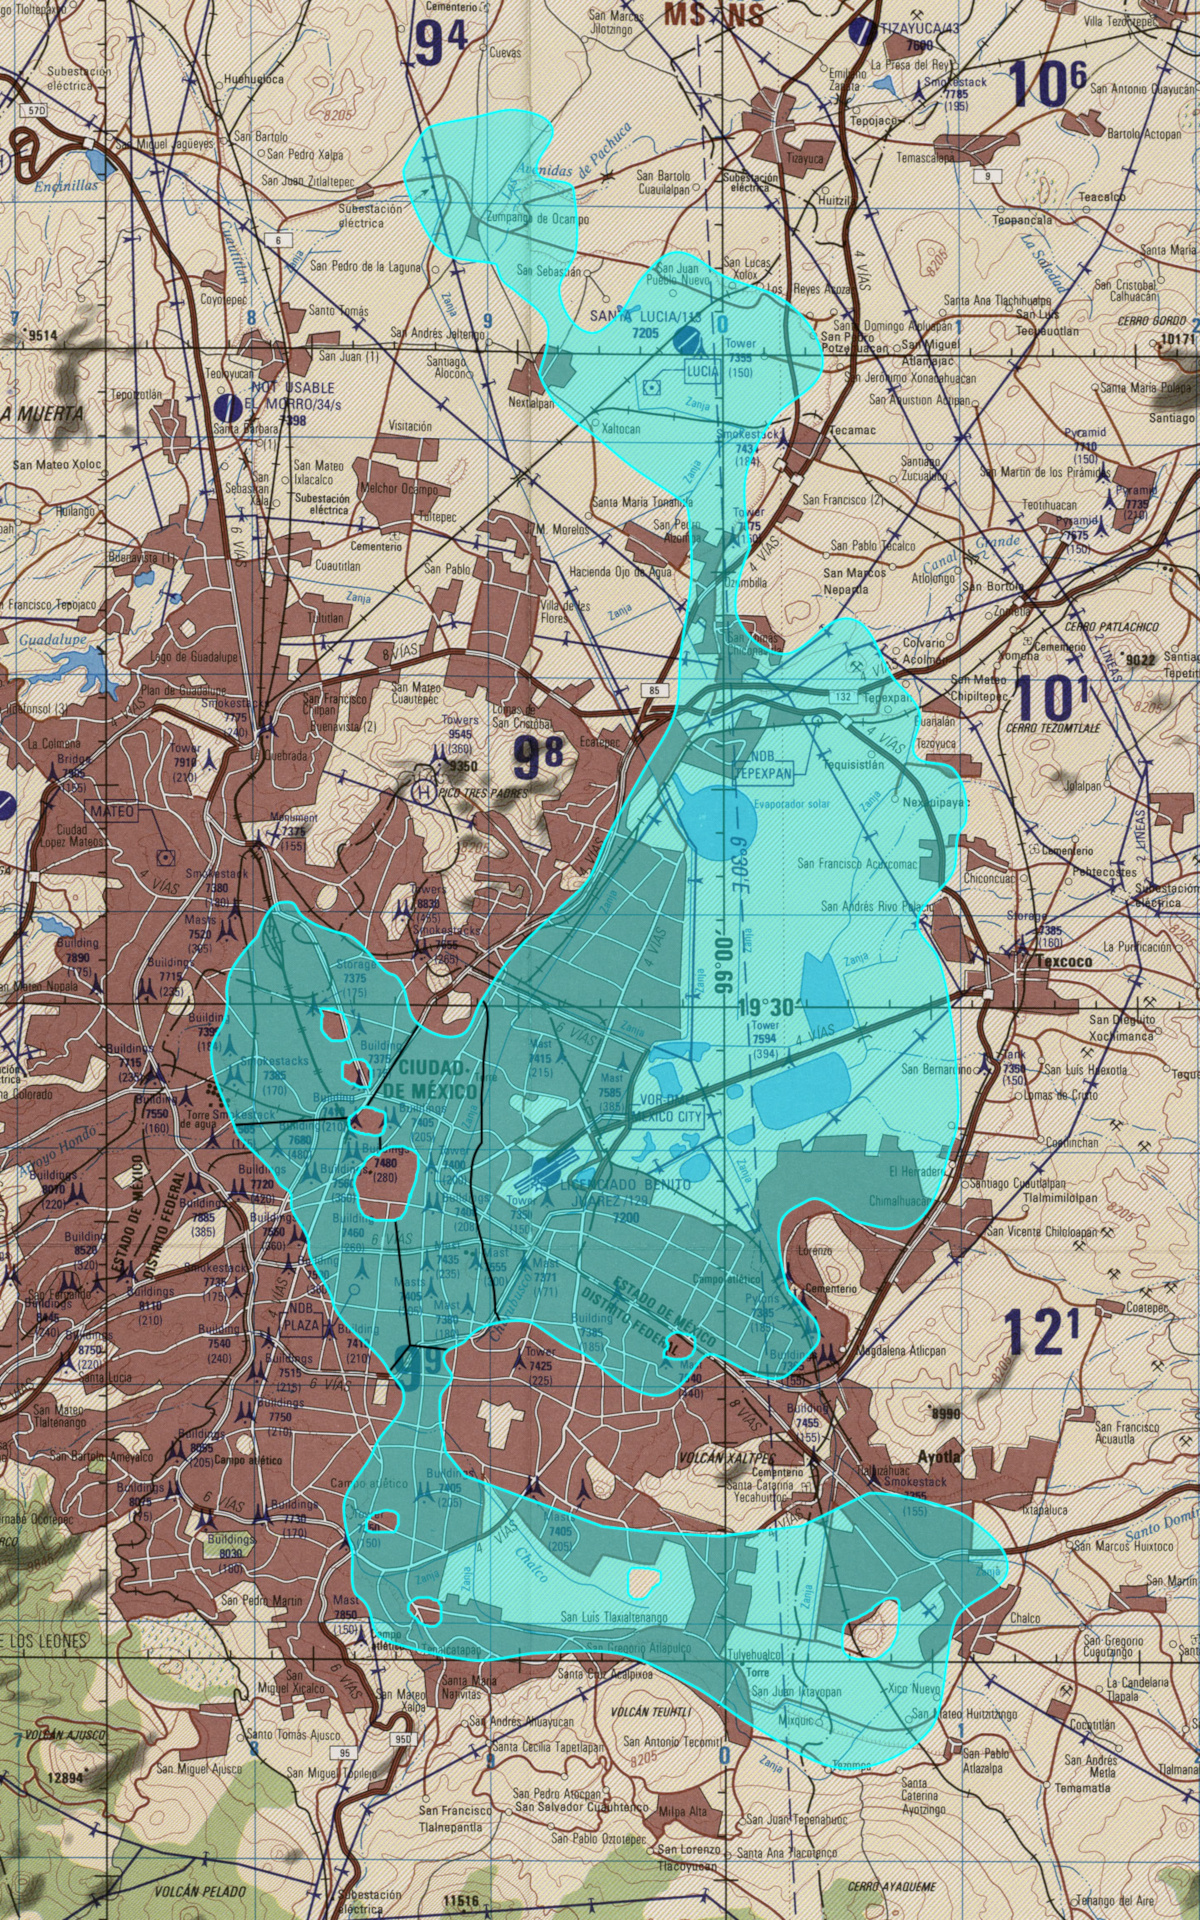 Map of Lake Texcoco and adjoining lakes superimposed over modern-day Mexico City.